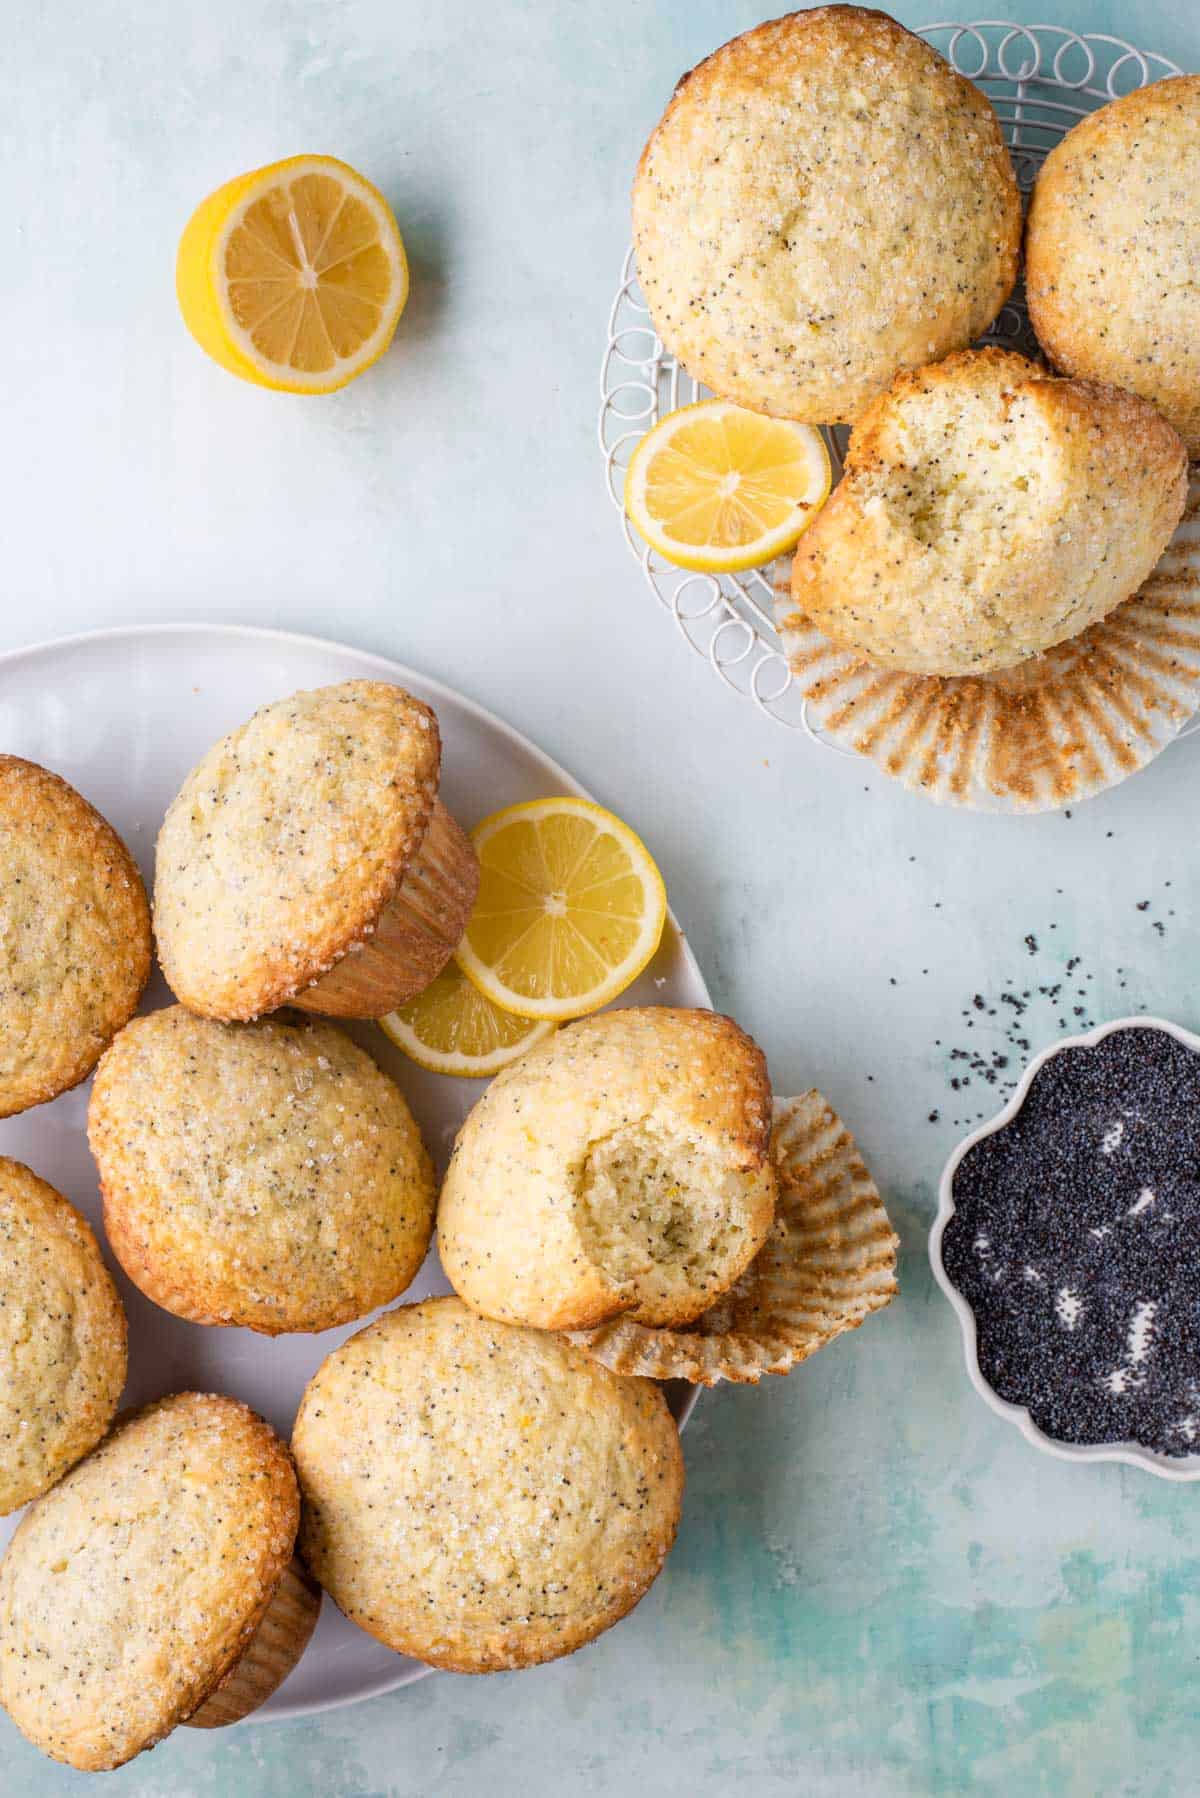 two plates of lemon poppy seed muffins piled up, some partially eaten, arranged with lemon slices and a bowl of poppy seeds